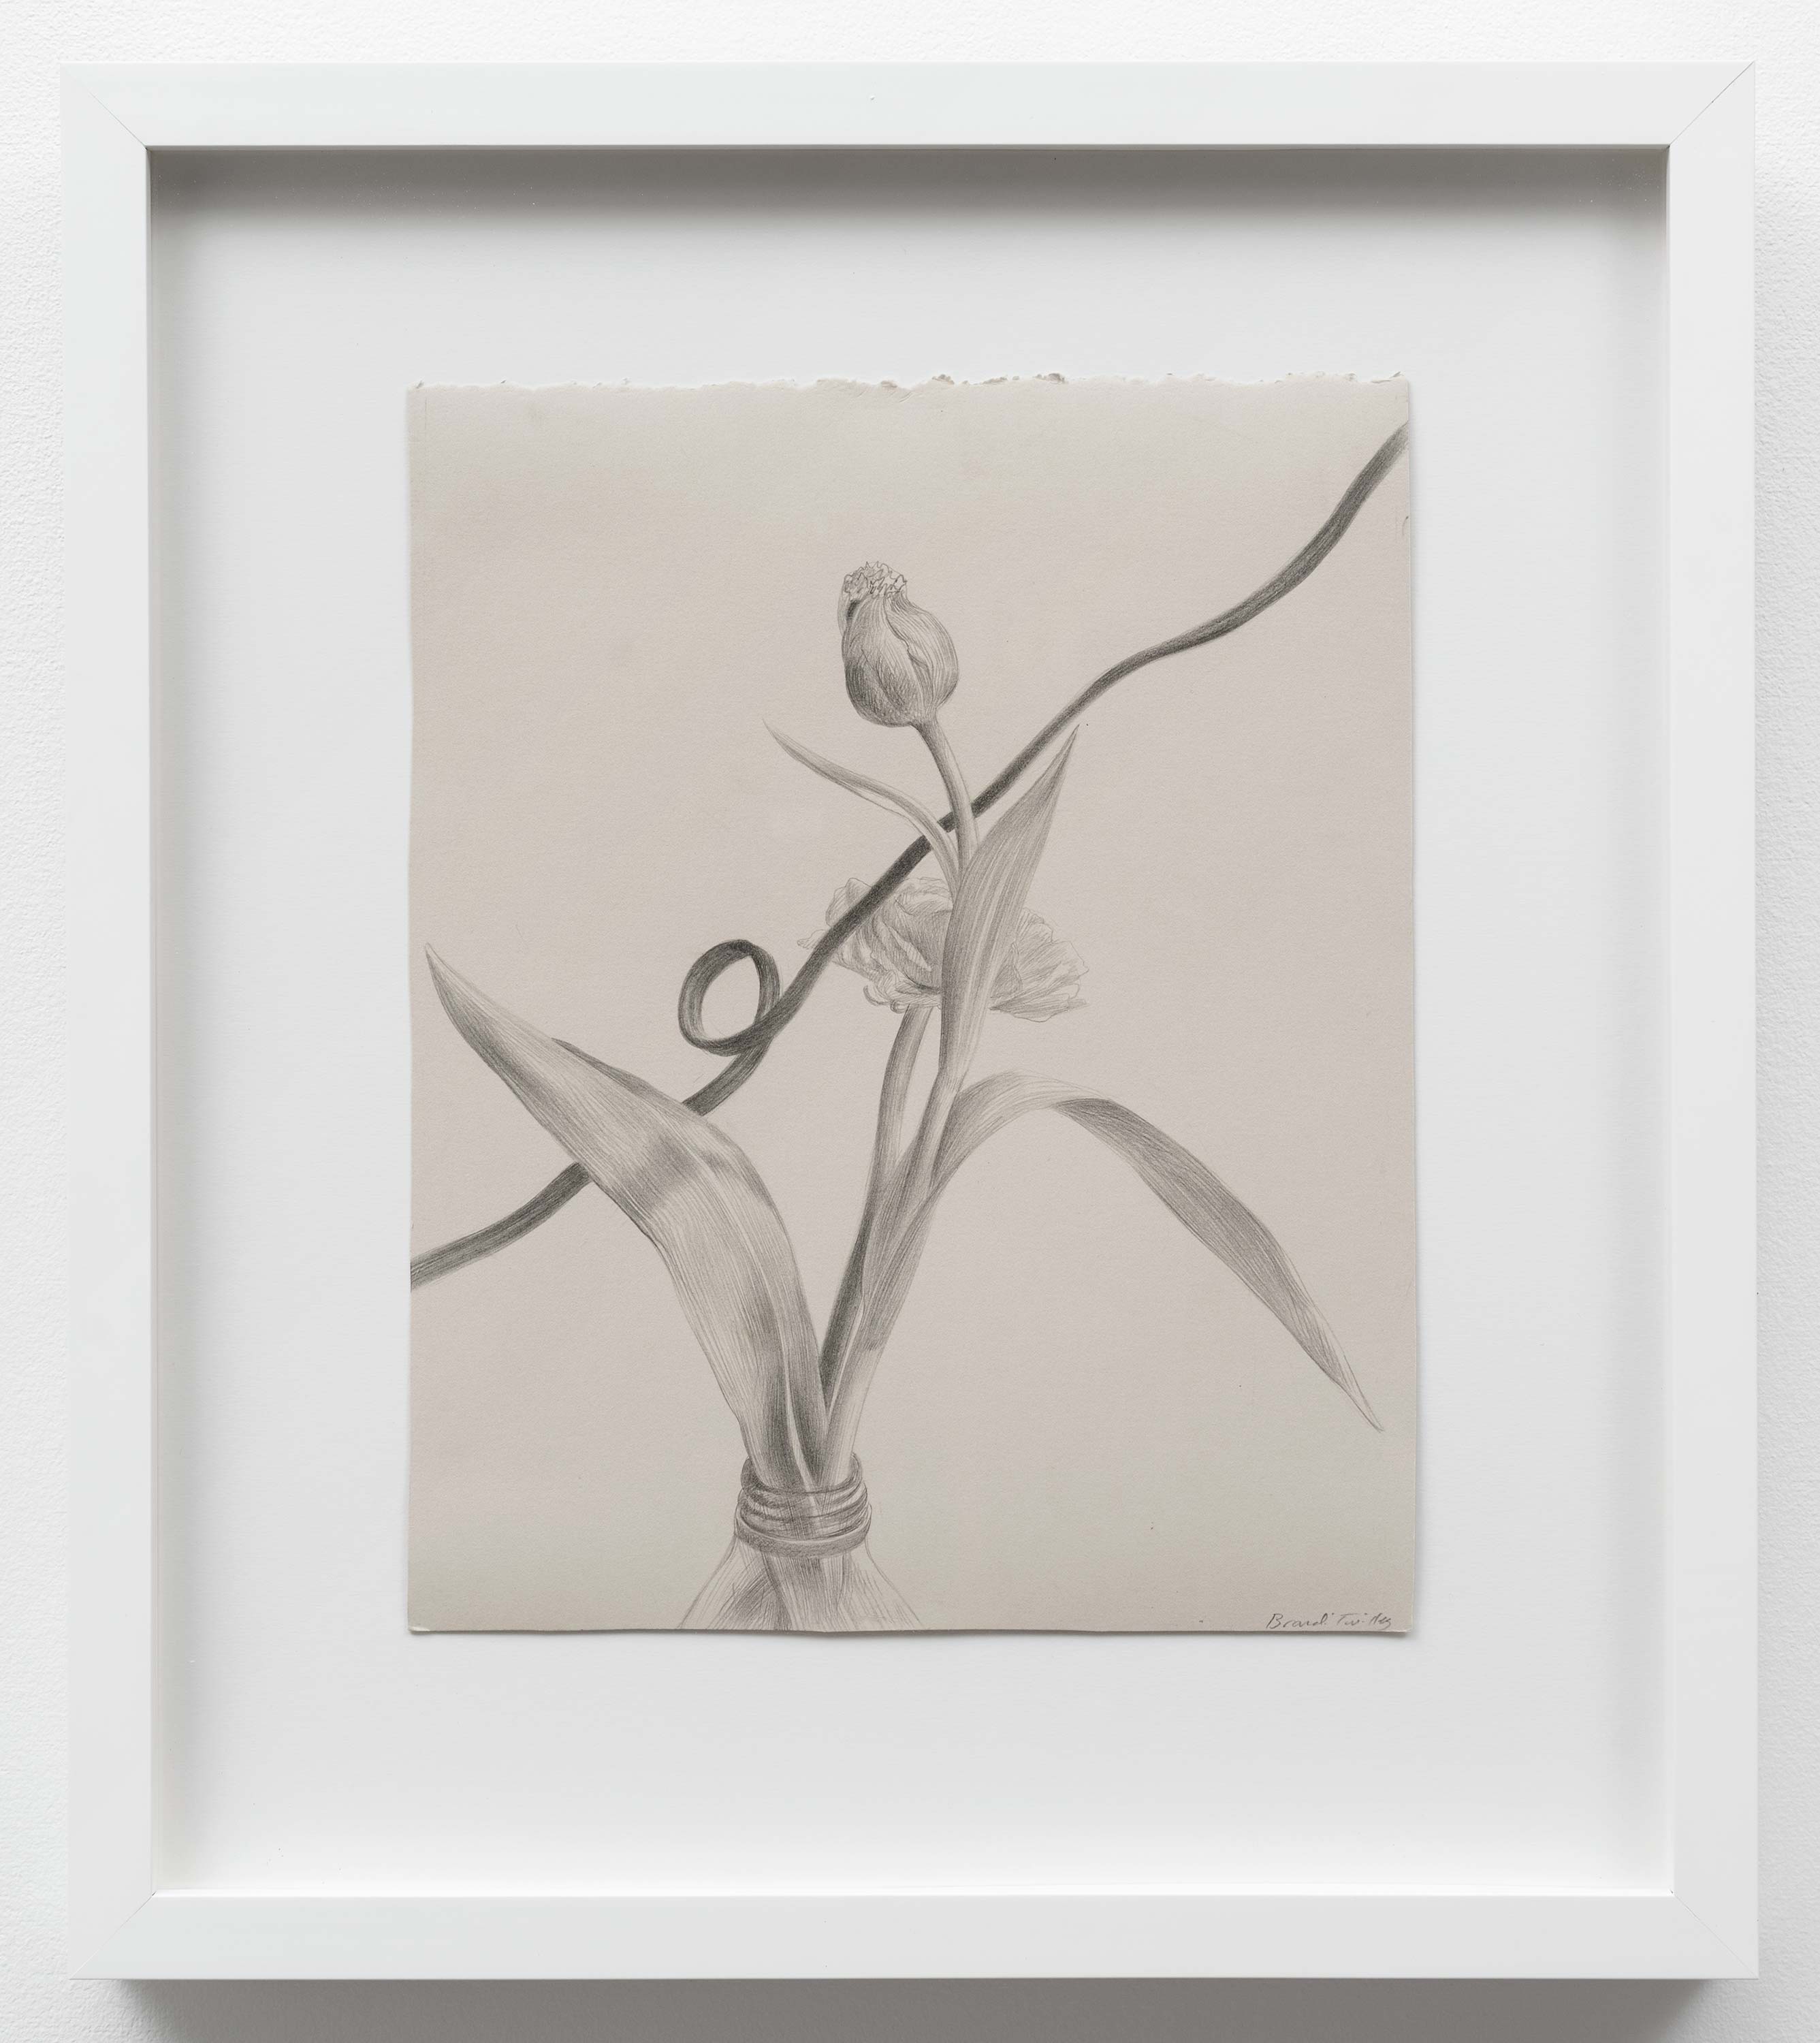 Brandi Twilley<br>Flowers with Cord II<br>2014<br>Graphite on gray paper<br>9 x 11 inches (23 x 28 cm)